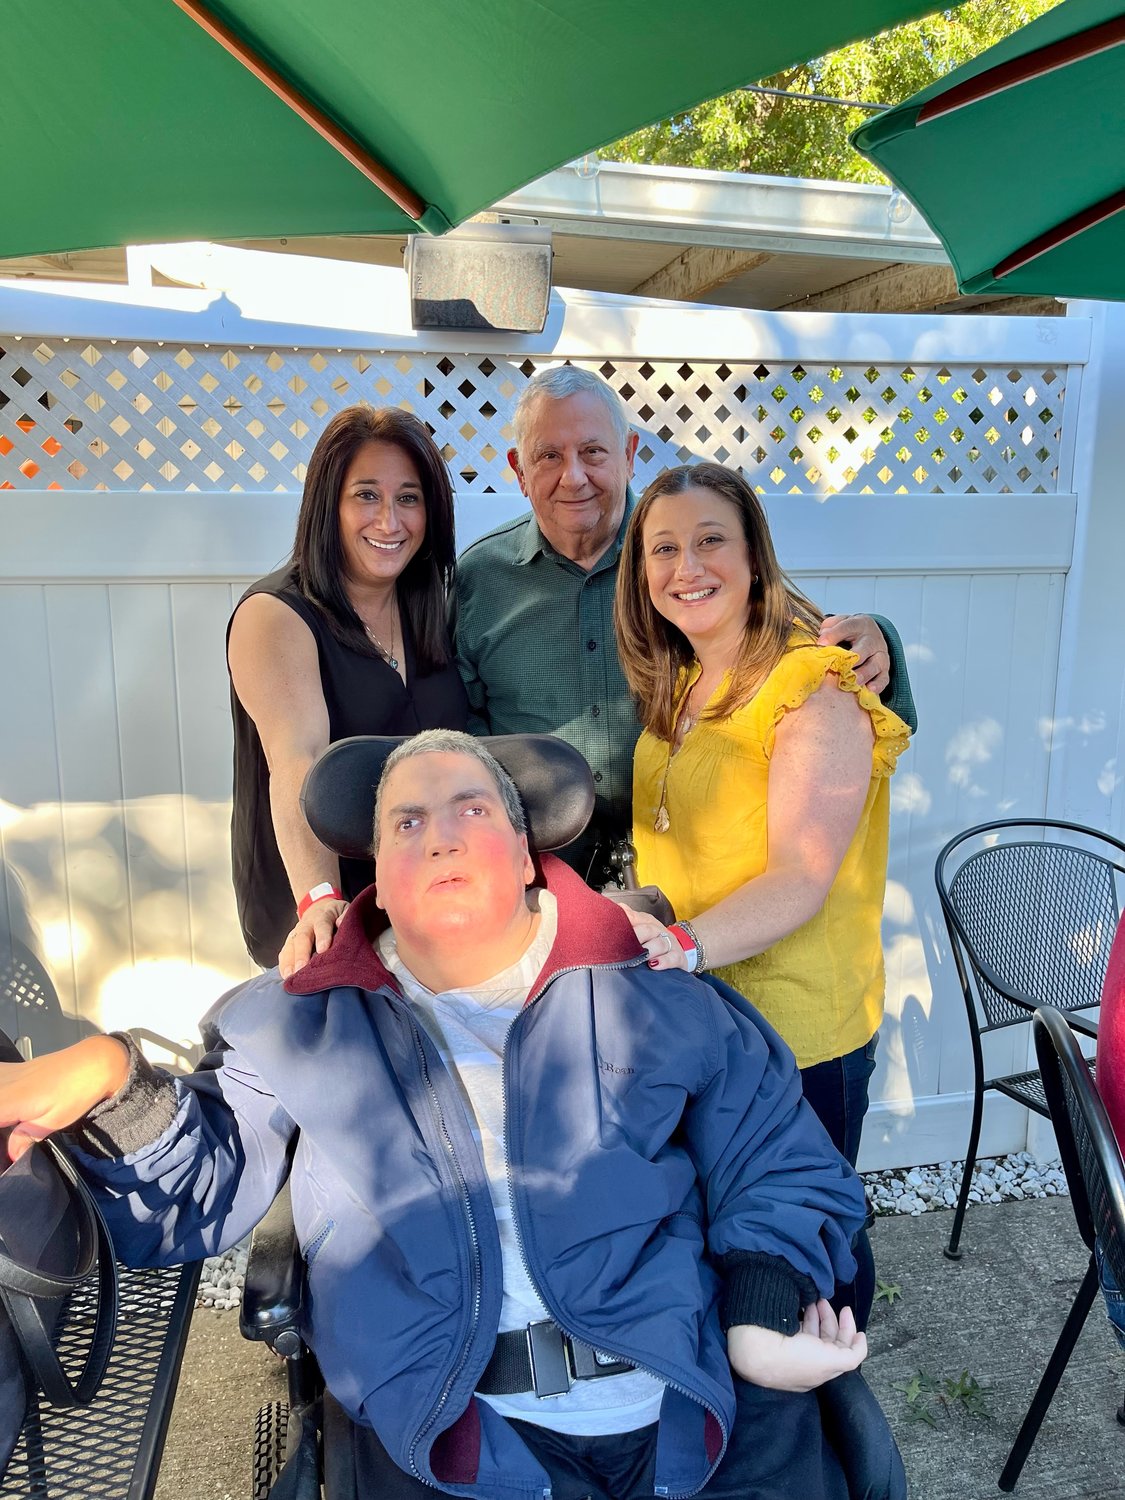 Phillip Solinto, who was born with cerebral palsy, has always received the steadfast support of his sister Gabrielle, his father, Antonio, and his sister Emilia.